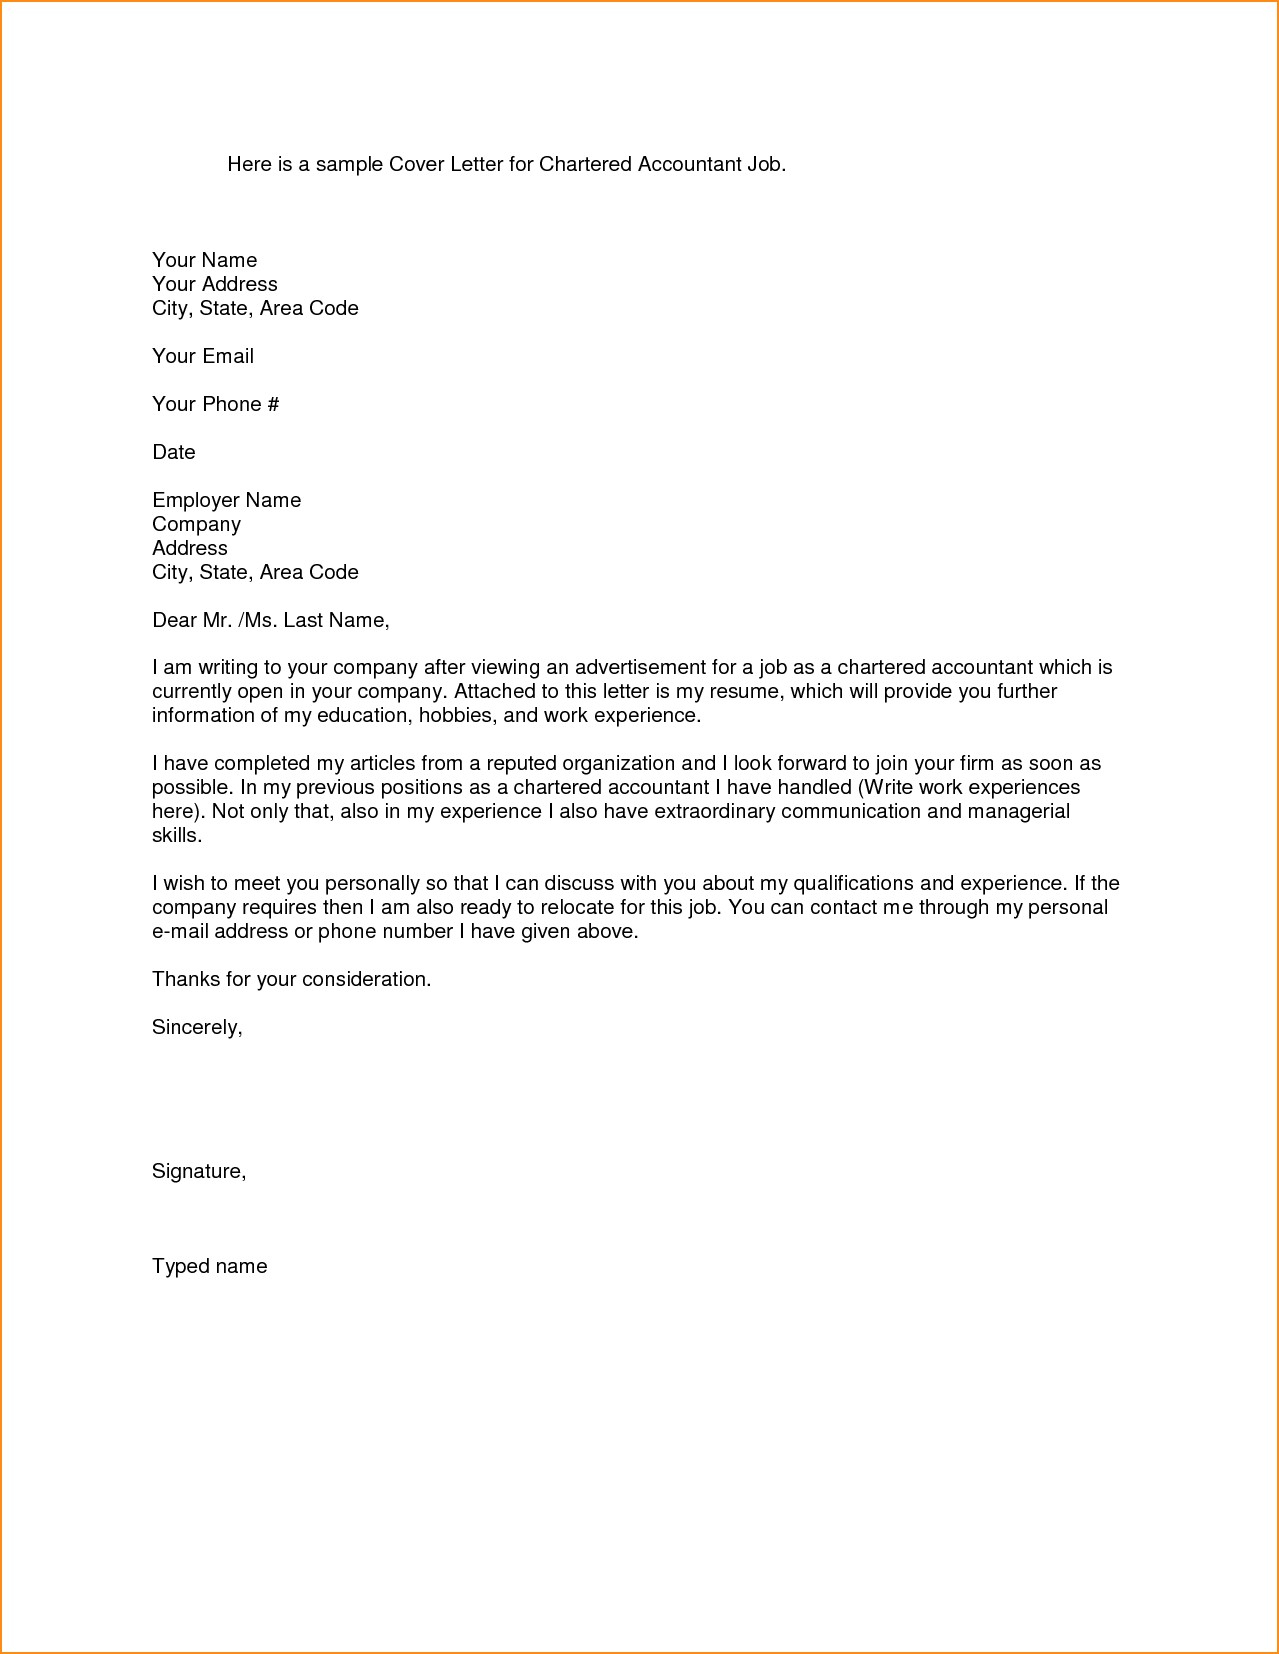 Email Cover Letter Template - Job Application Letter format Template Copy Cover Letter Template Hr